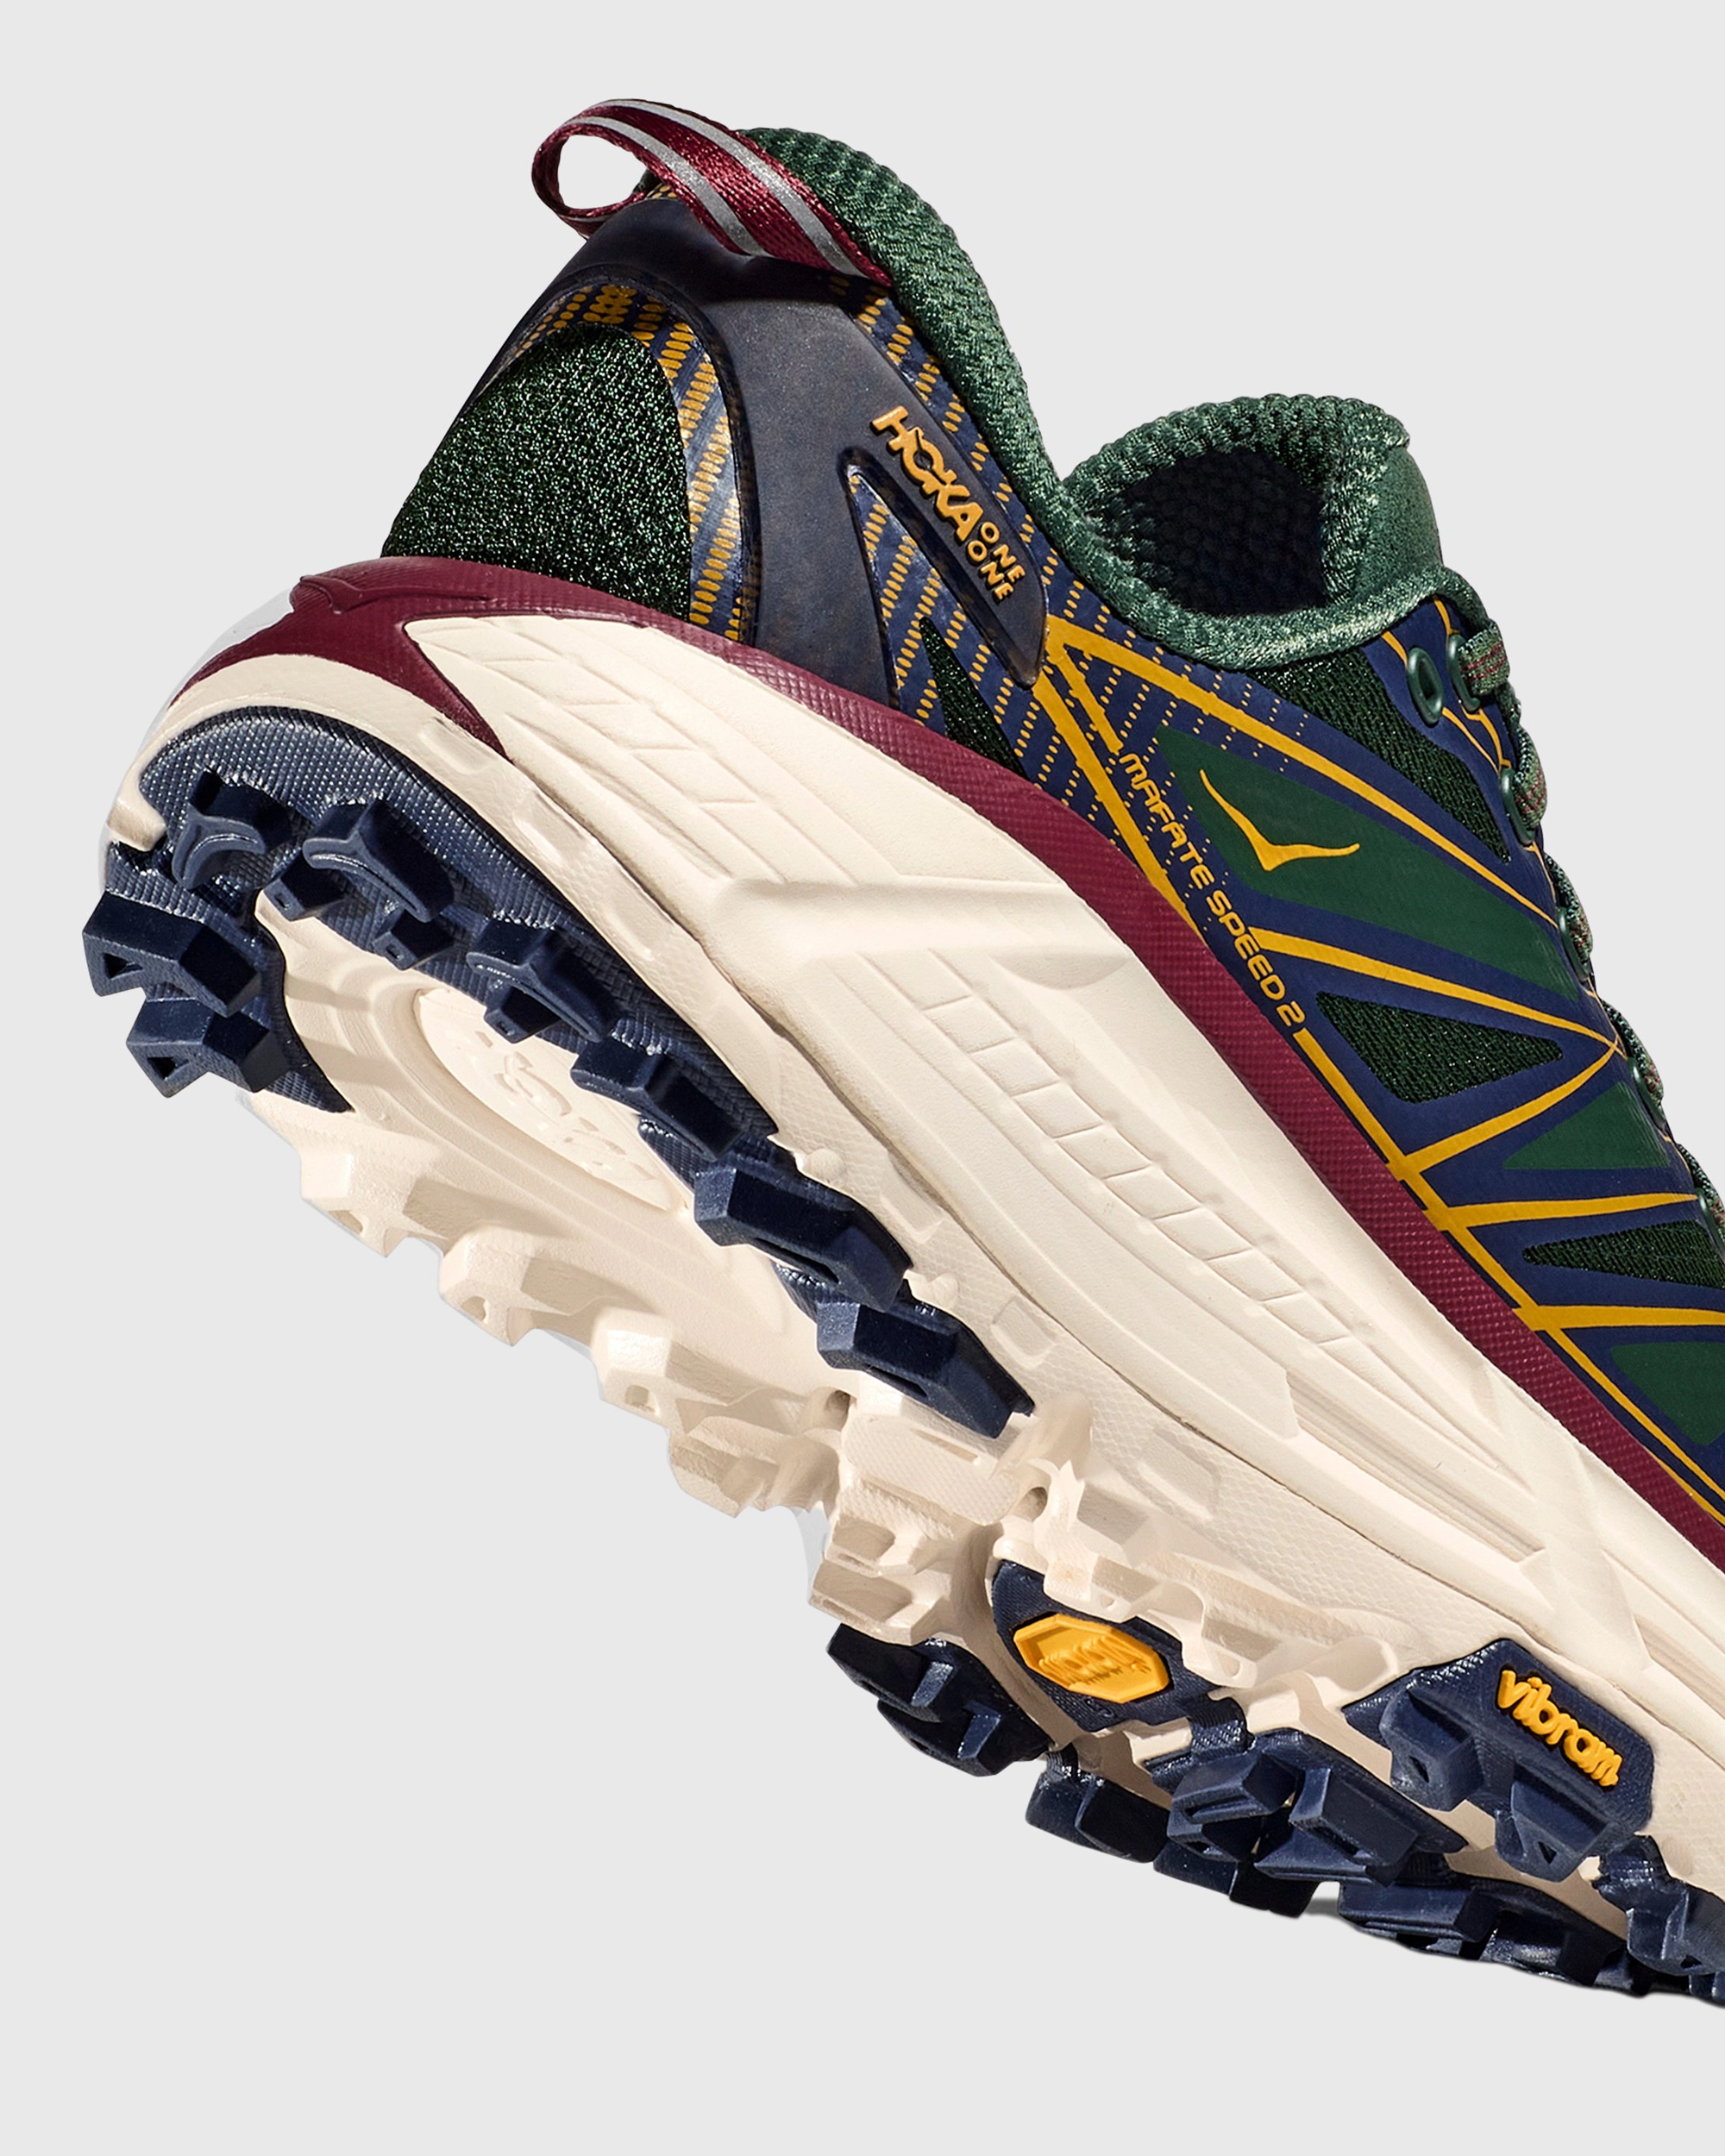 hoka branded shoes, green shoes, trail running shoes